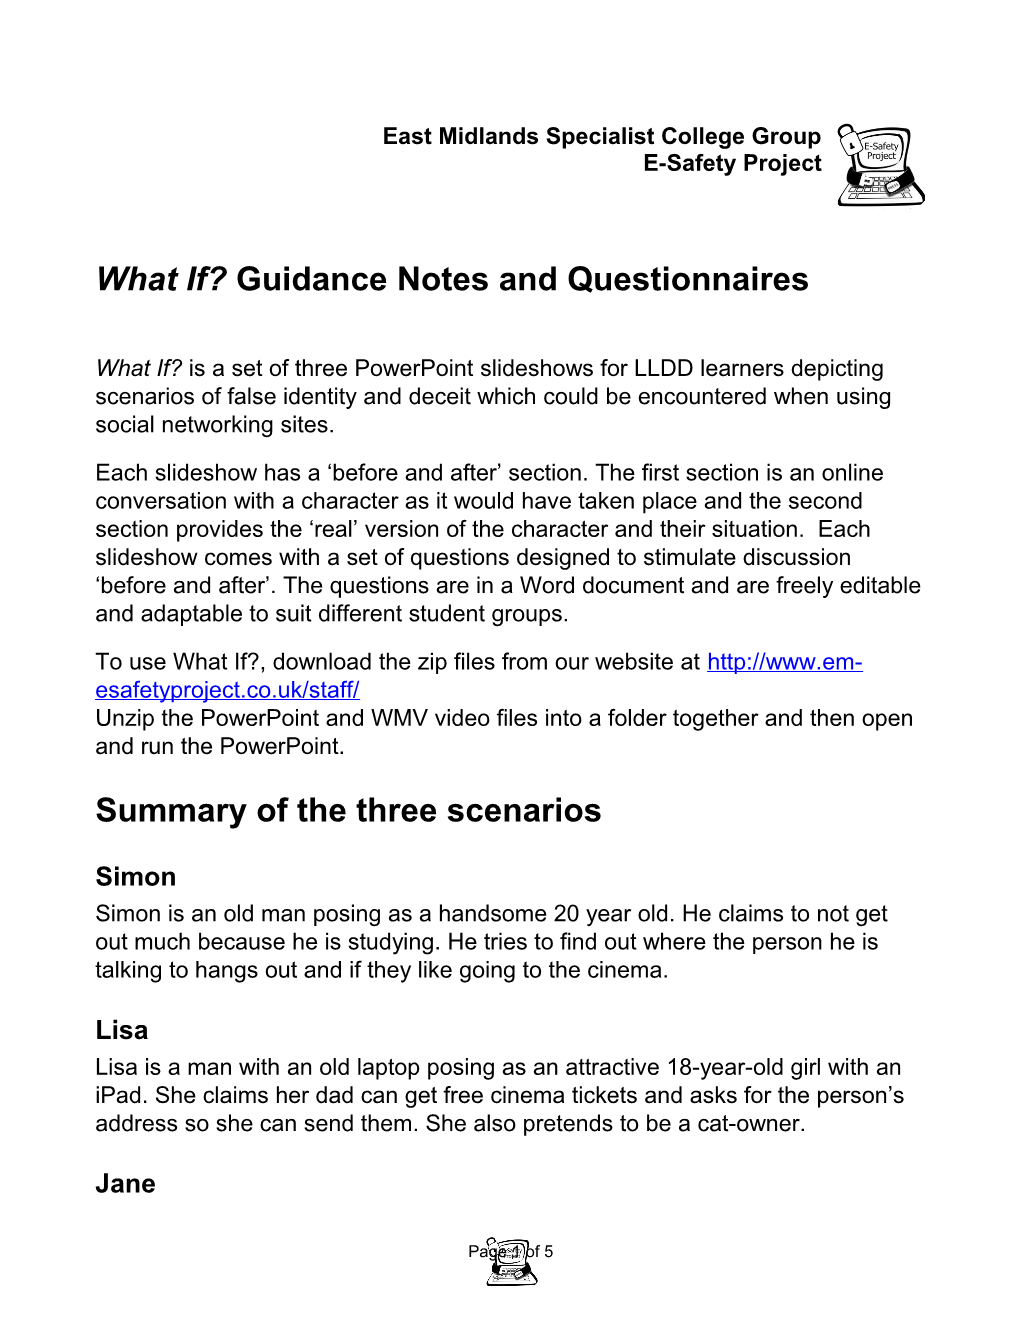 What If? Guidance Notes and Questionnaires